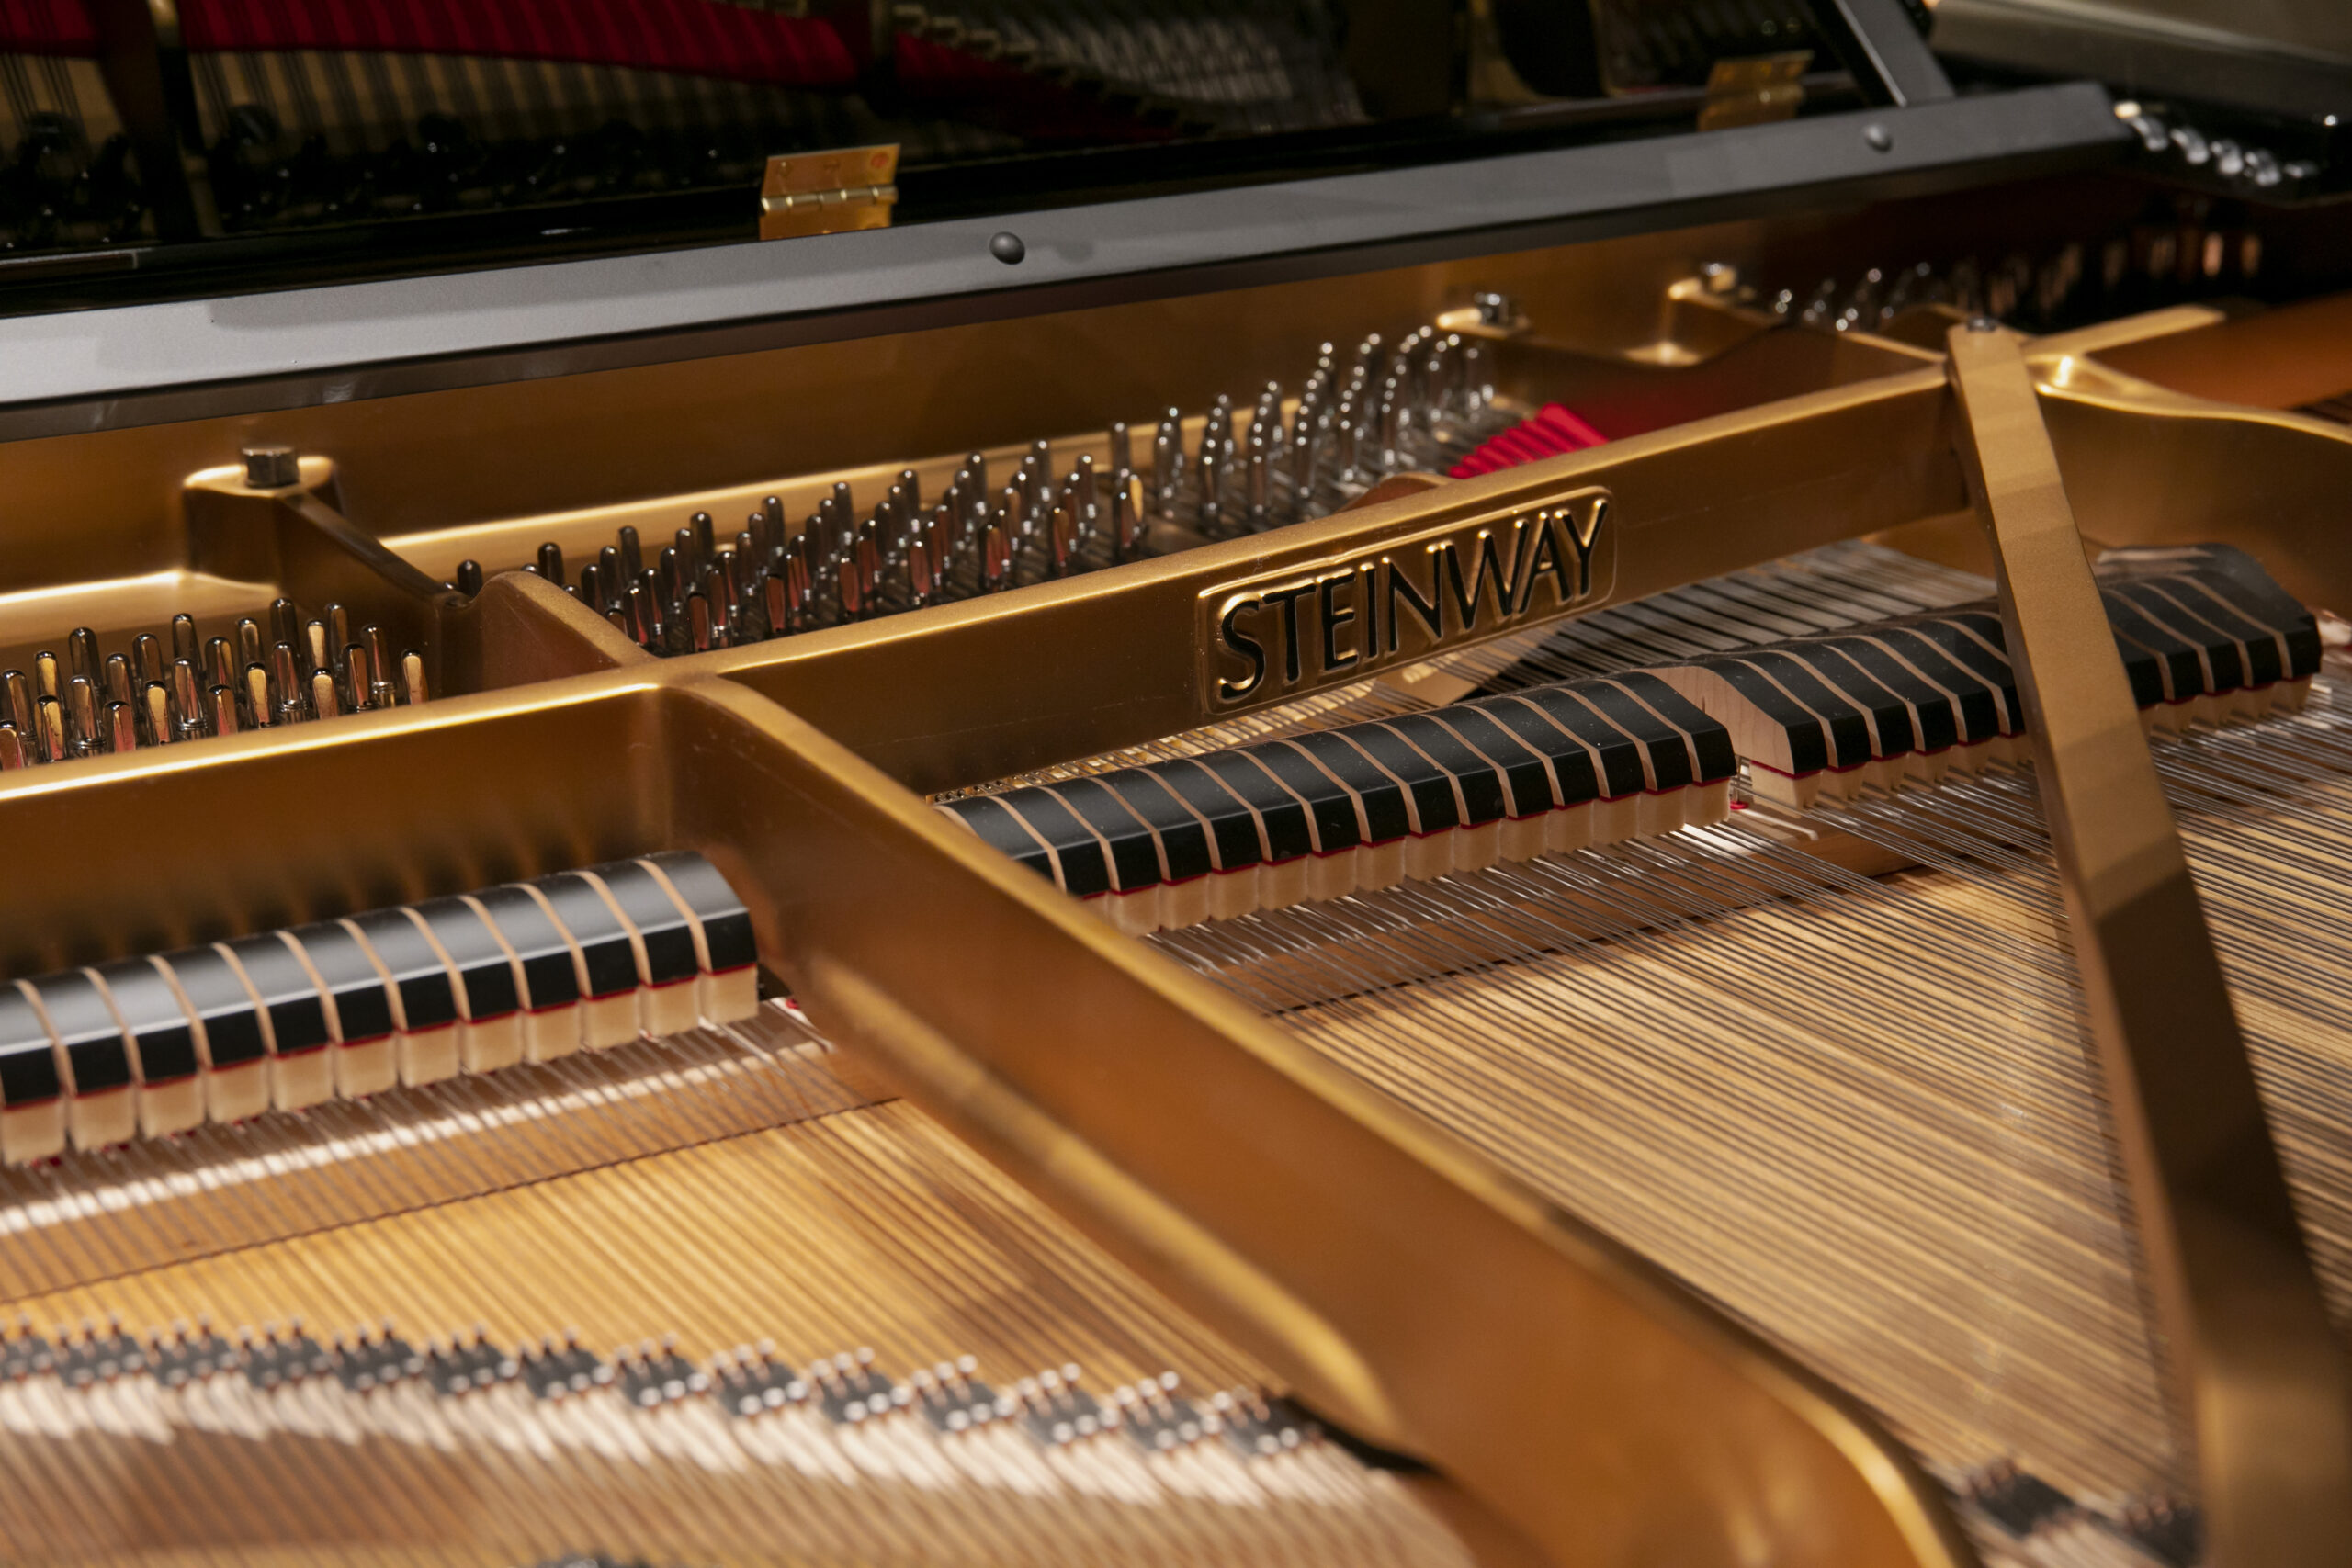 Photograph of concert grand piano